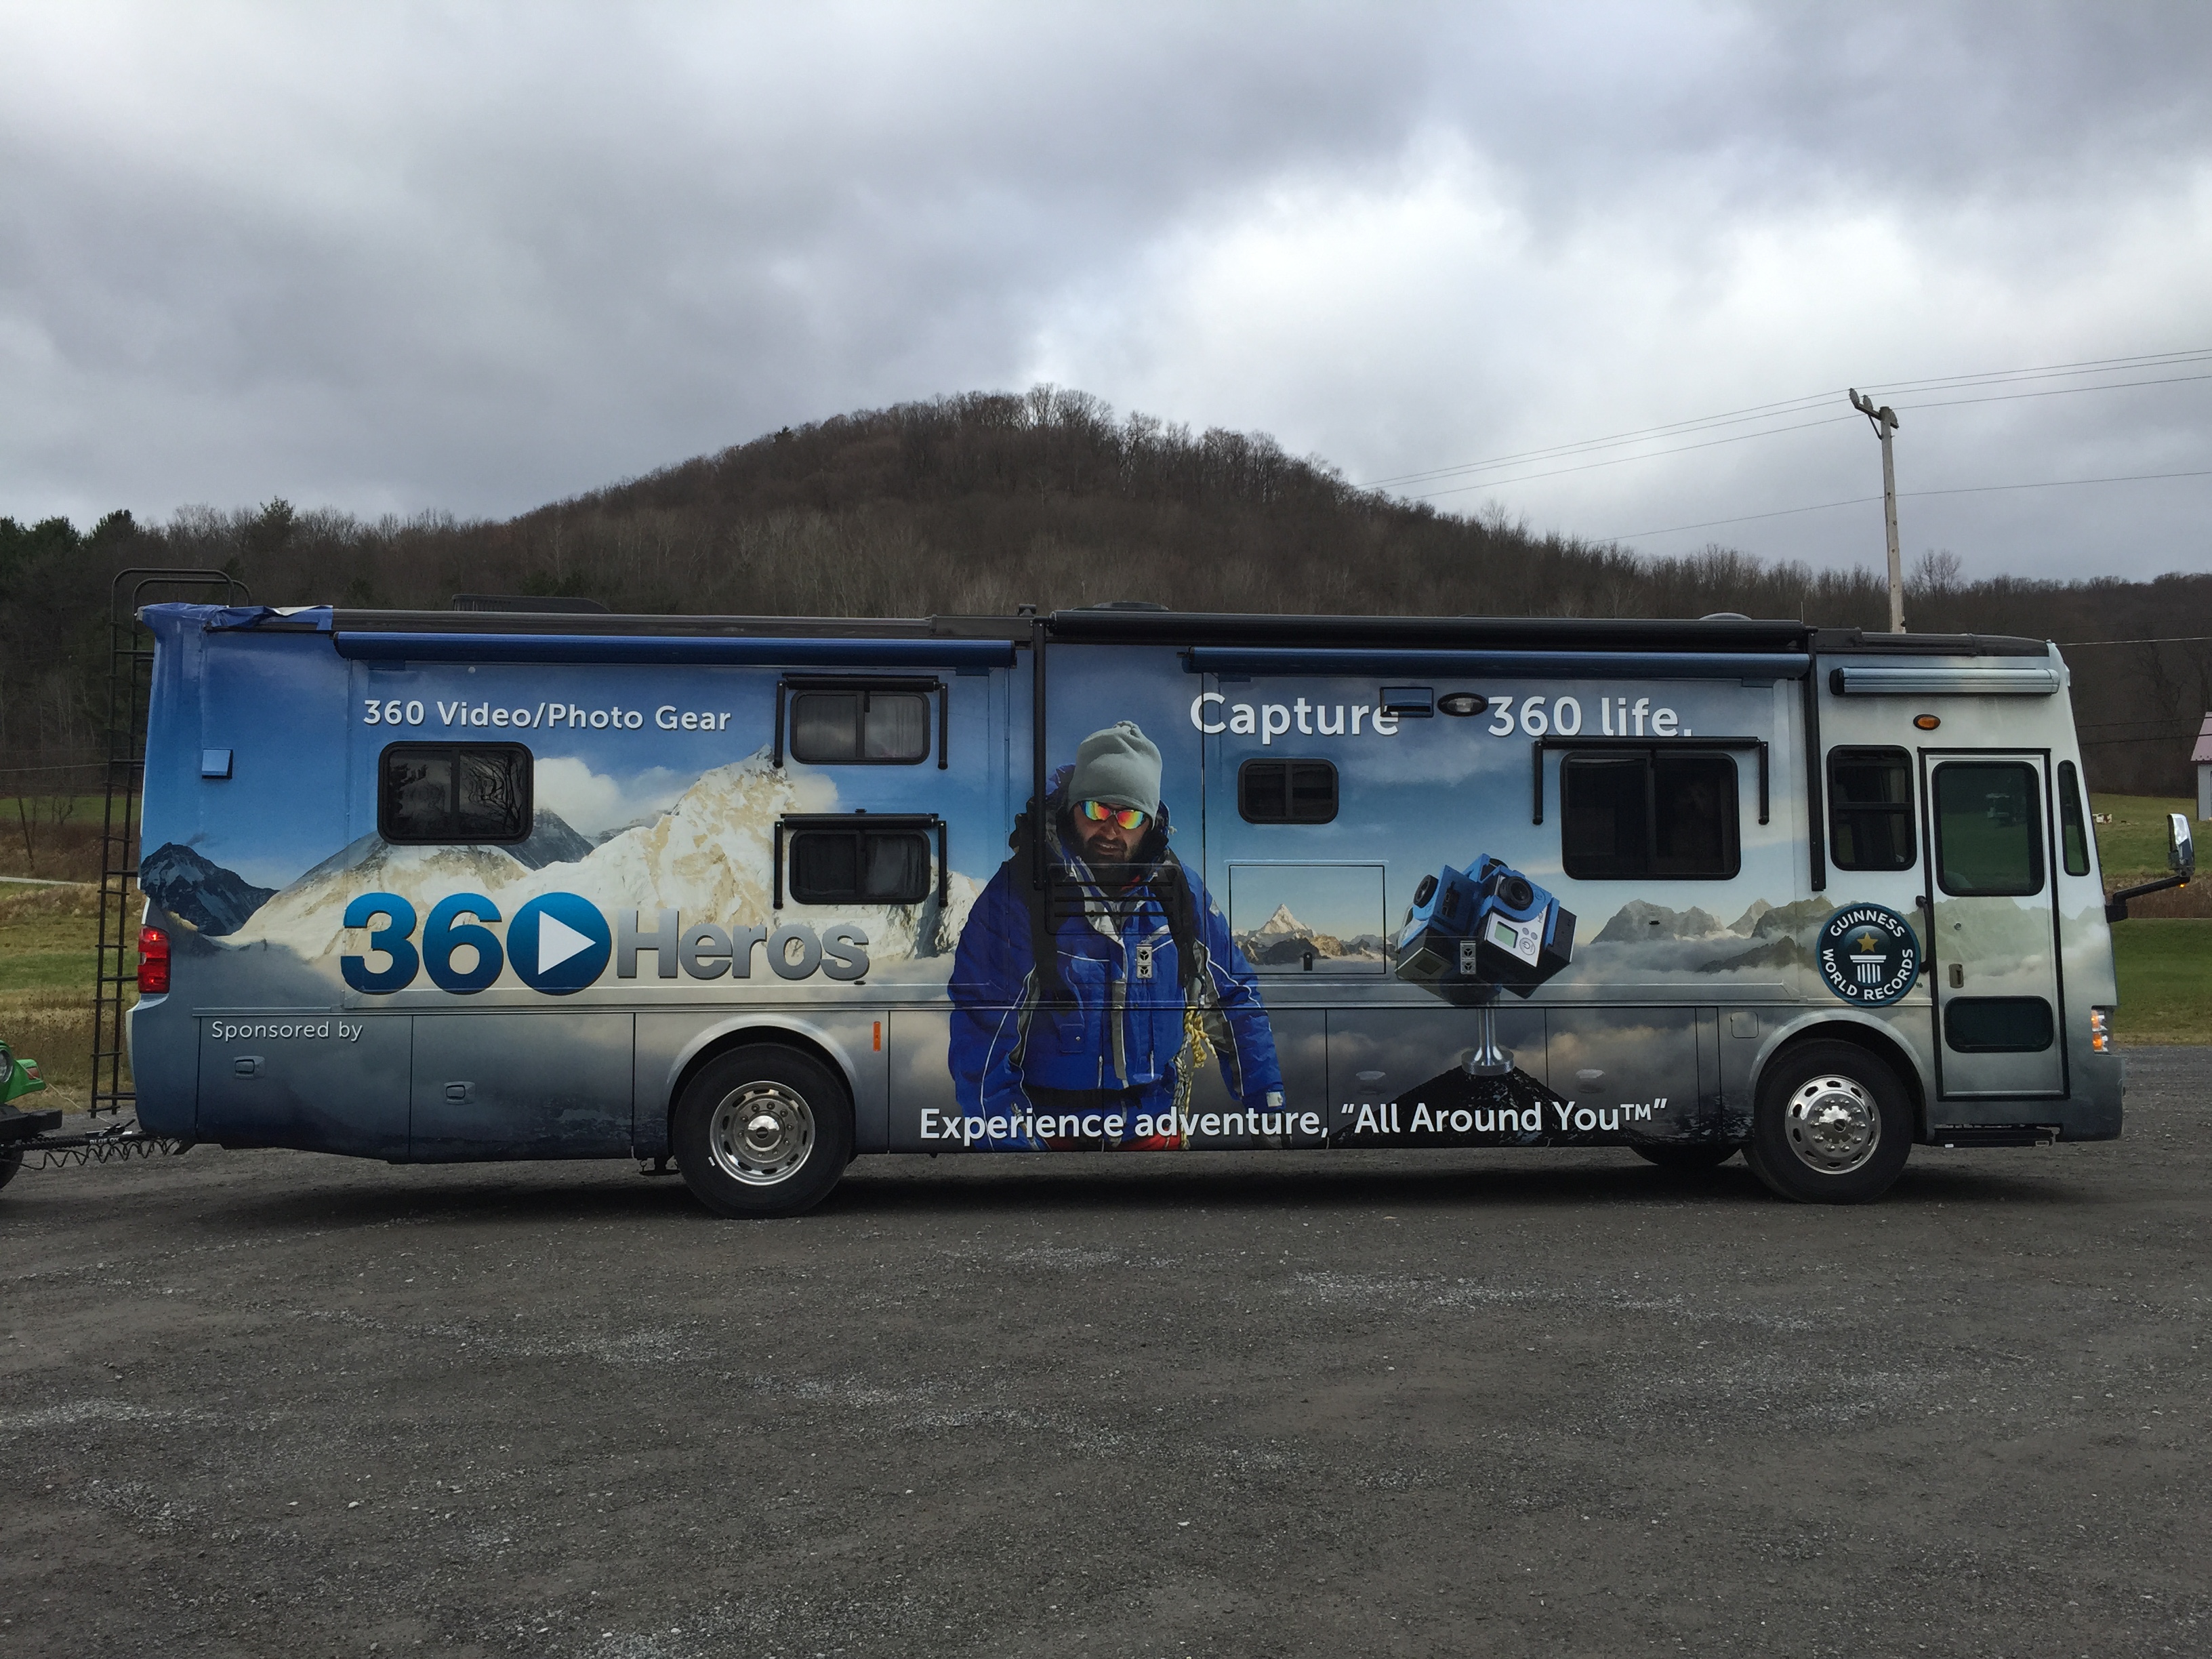 The 360RV commemorates 360Heros 2015 Guinness World Record.